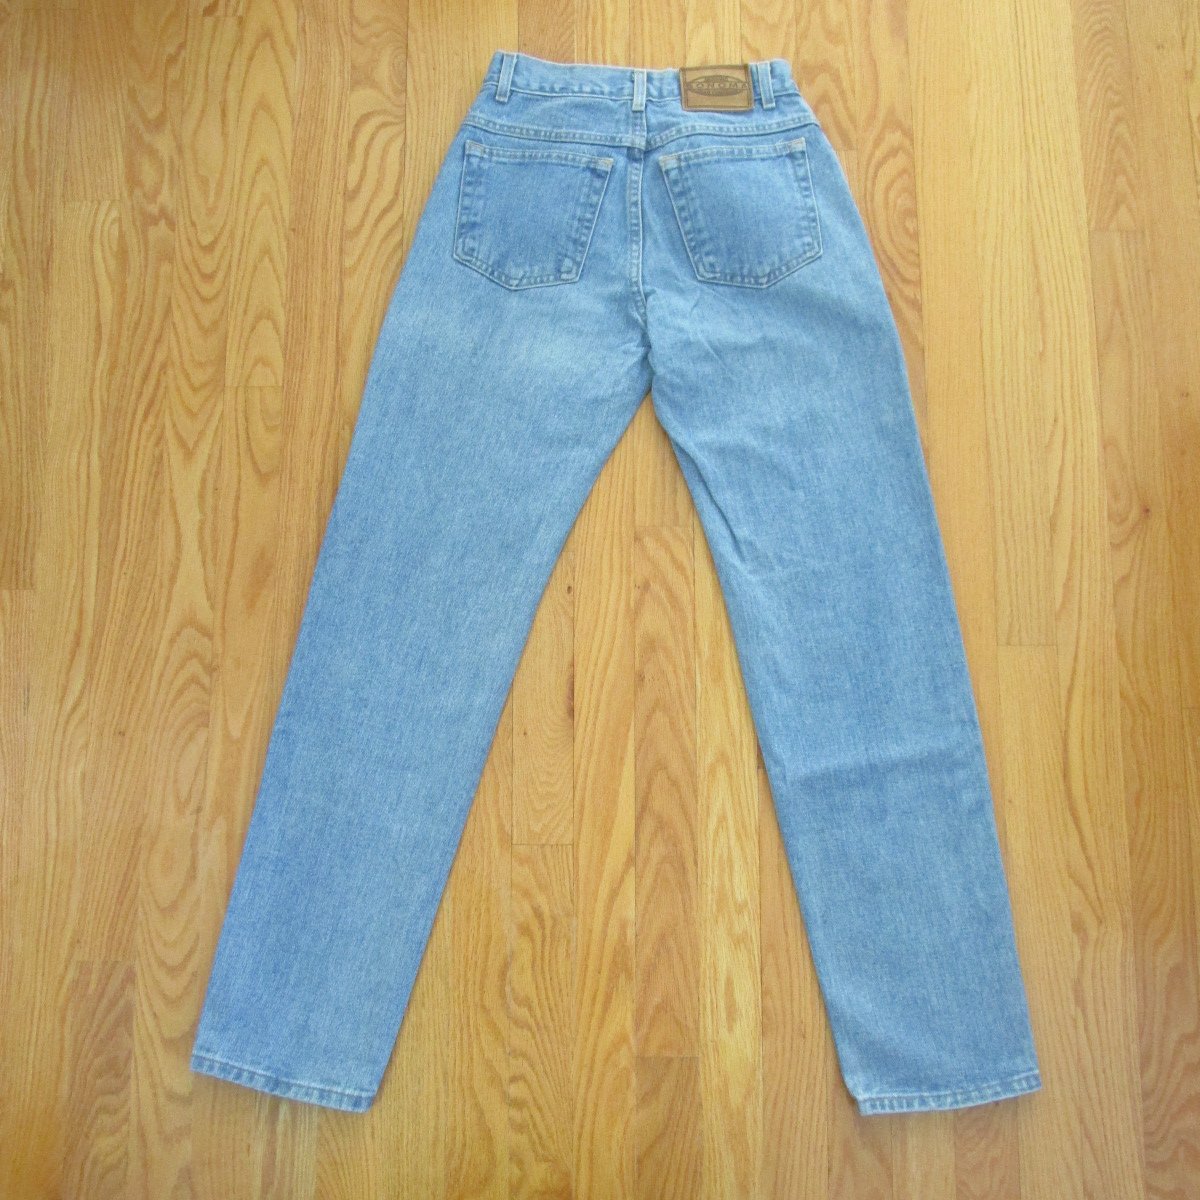 SONOMA WOMEN'S JUNIOR'S SIZE 9 M JEANS MED BLUE STONE WASHED RELAXED ...